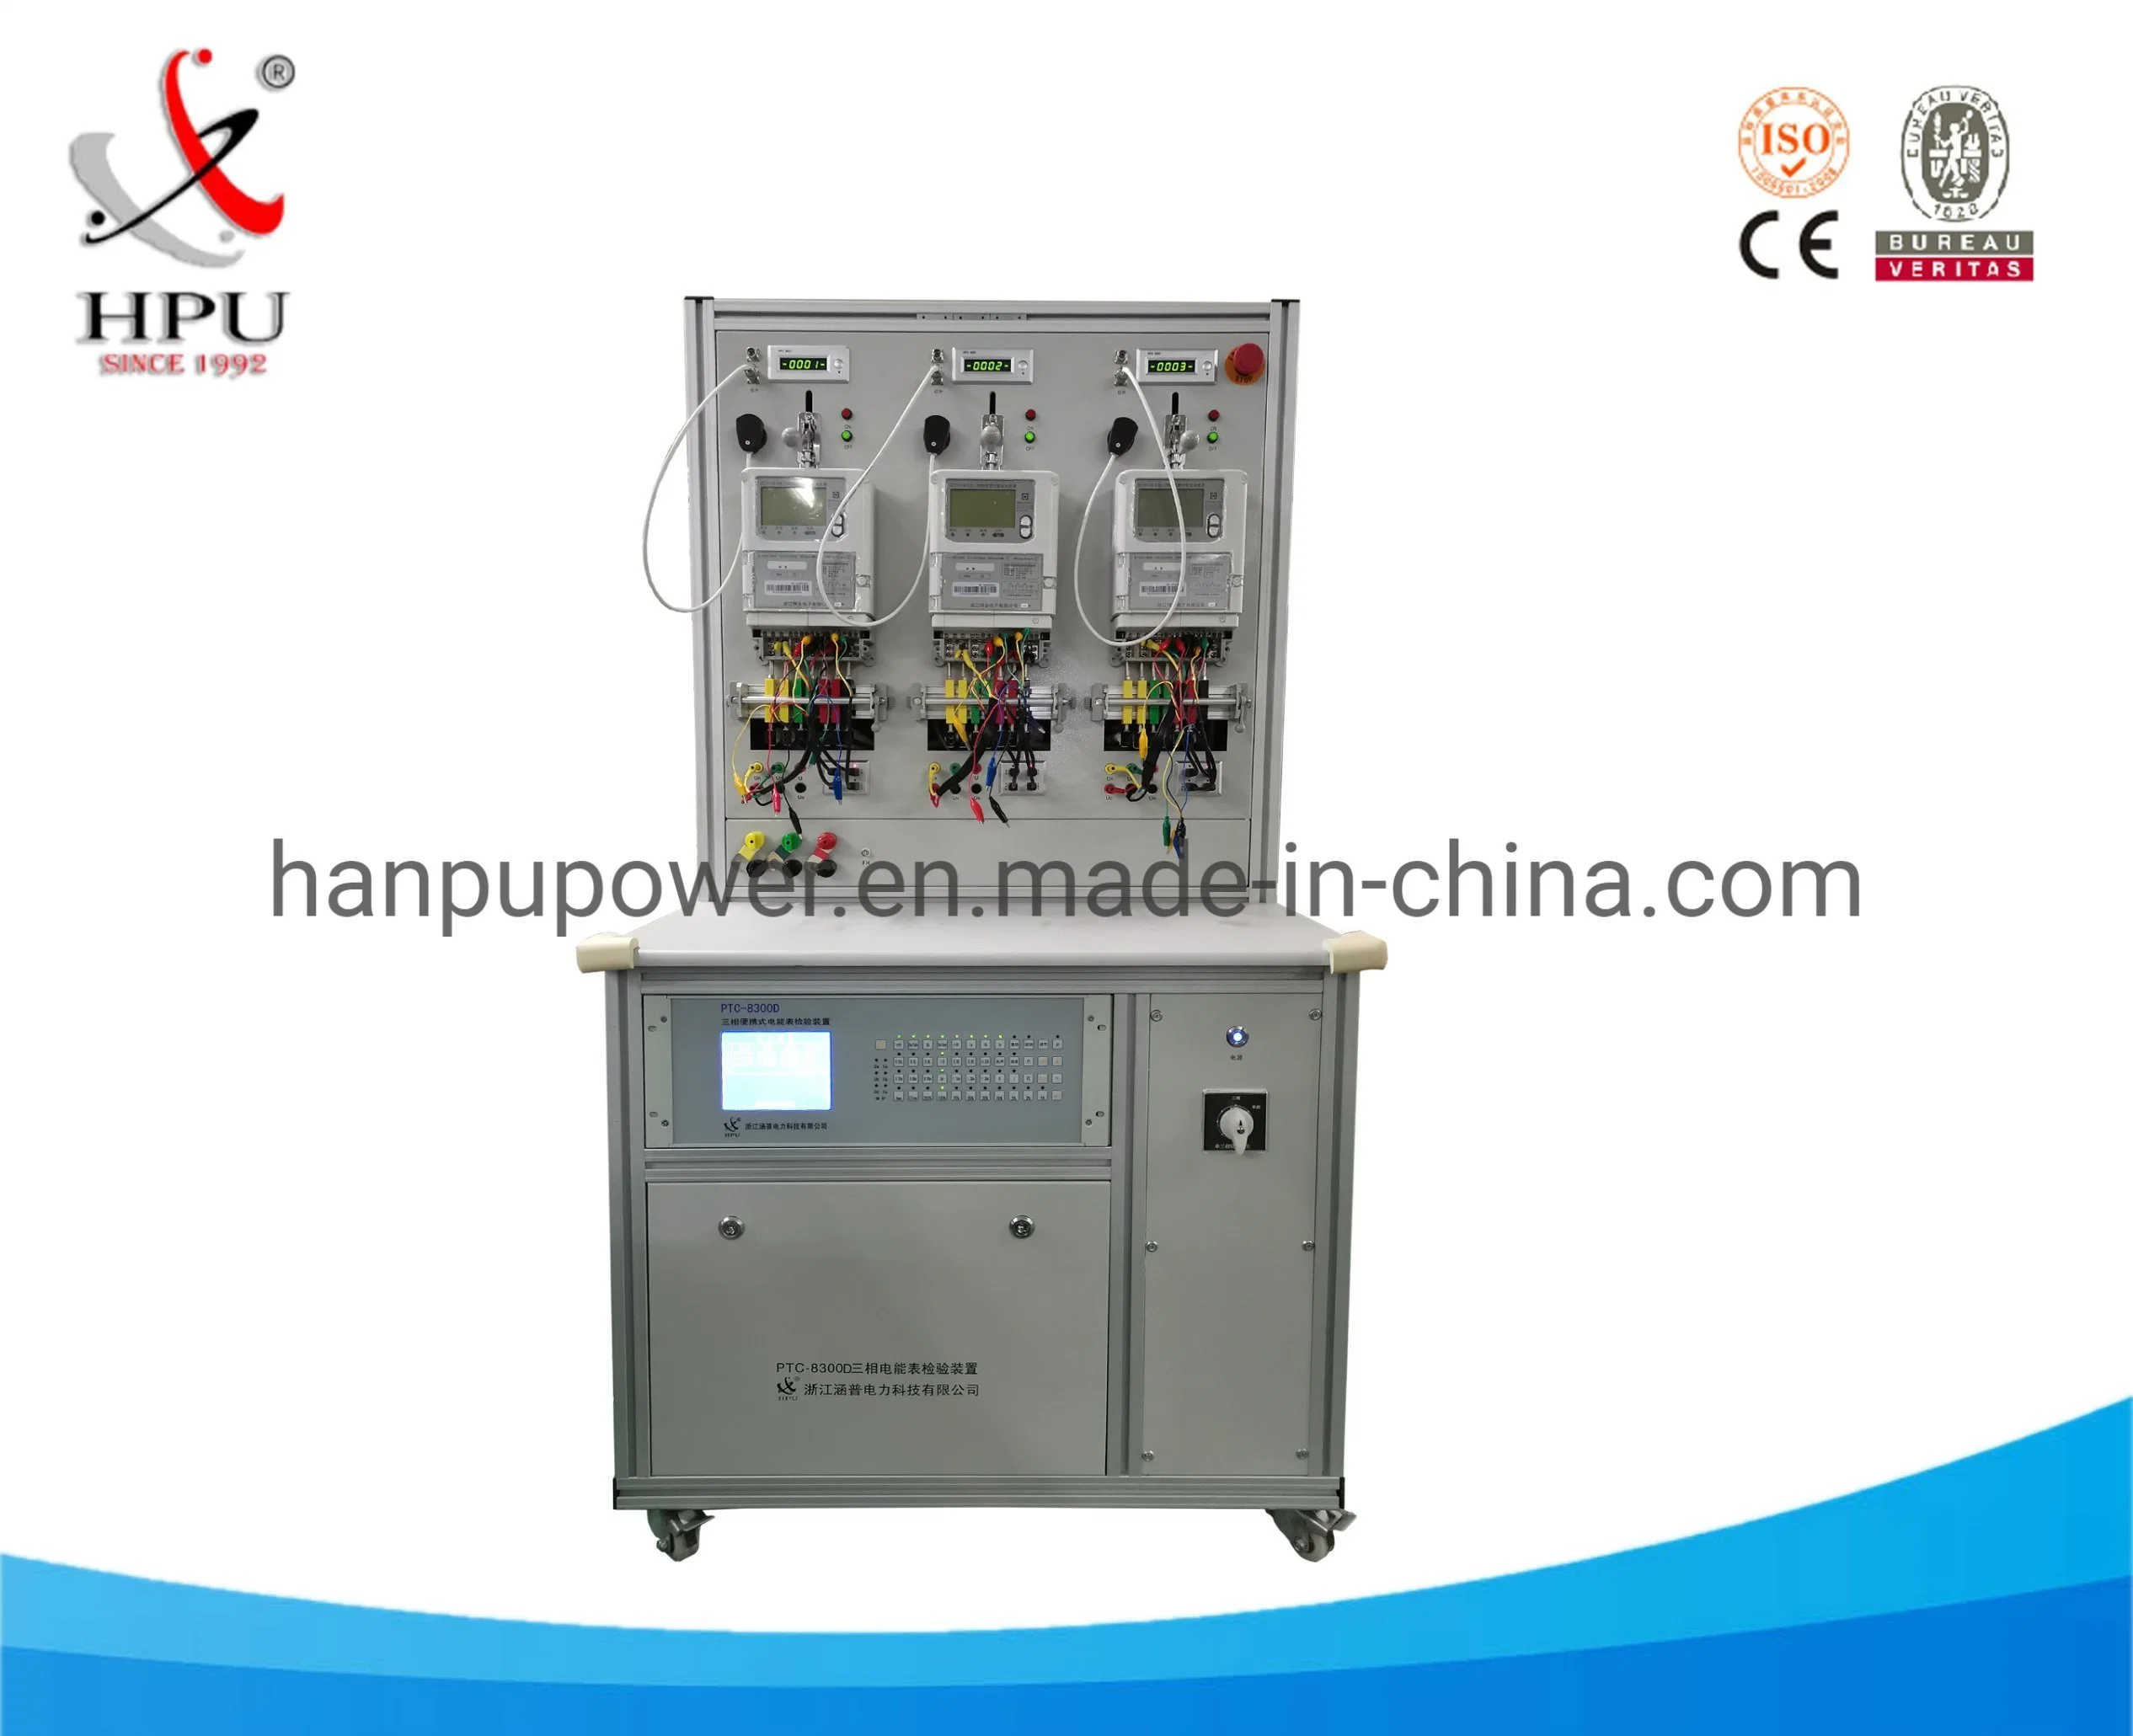 Portable Three Phase Electrical Meter Test Equipment with Special Design